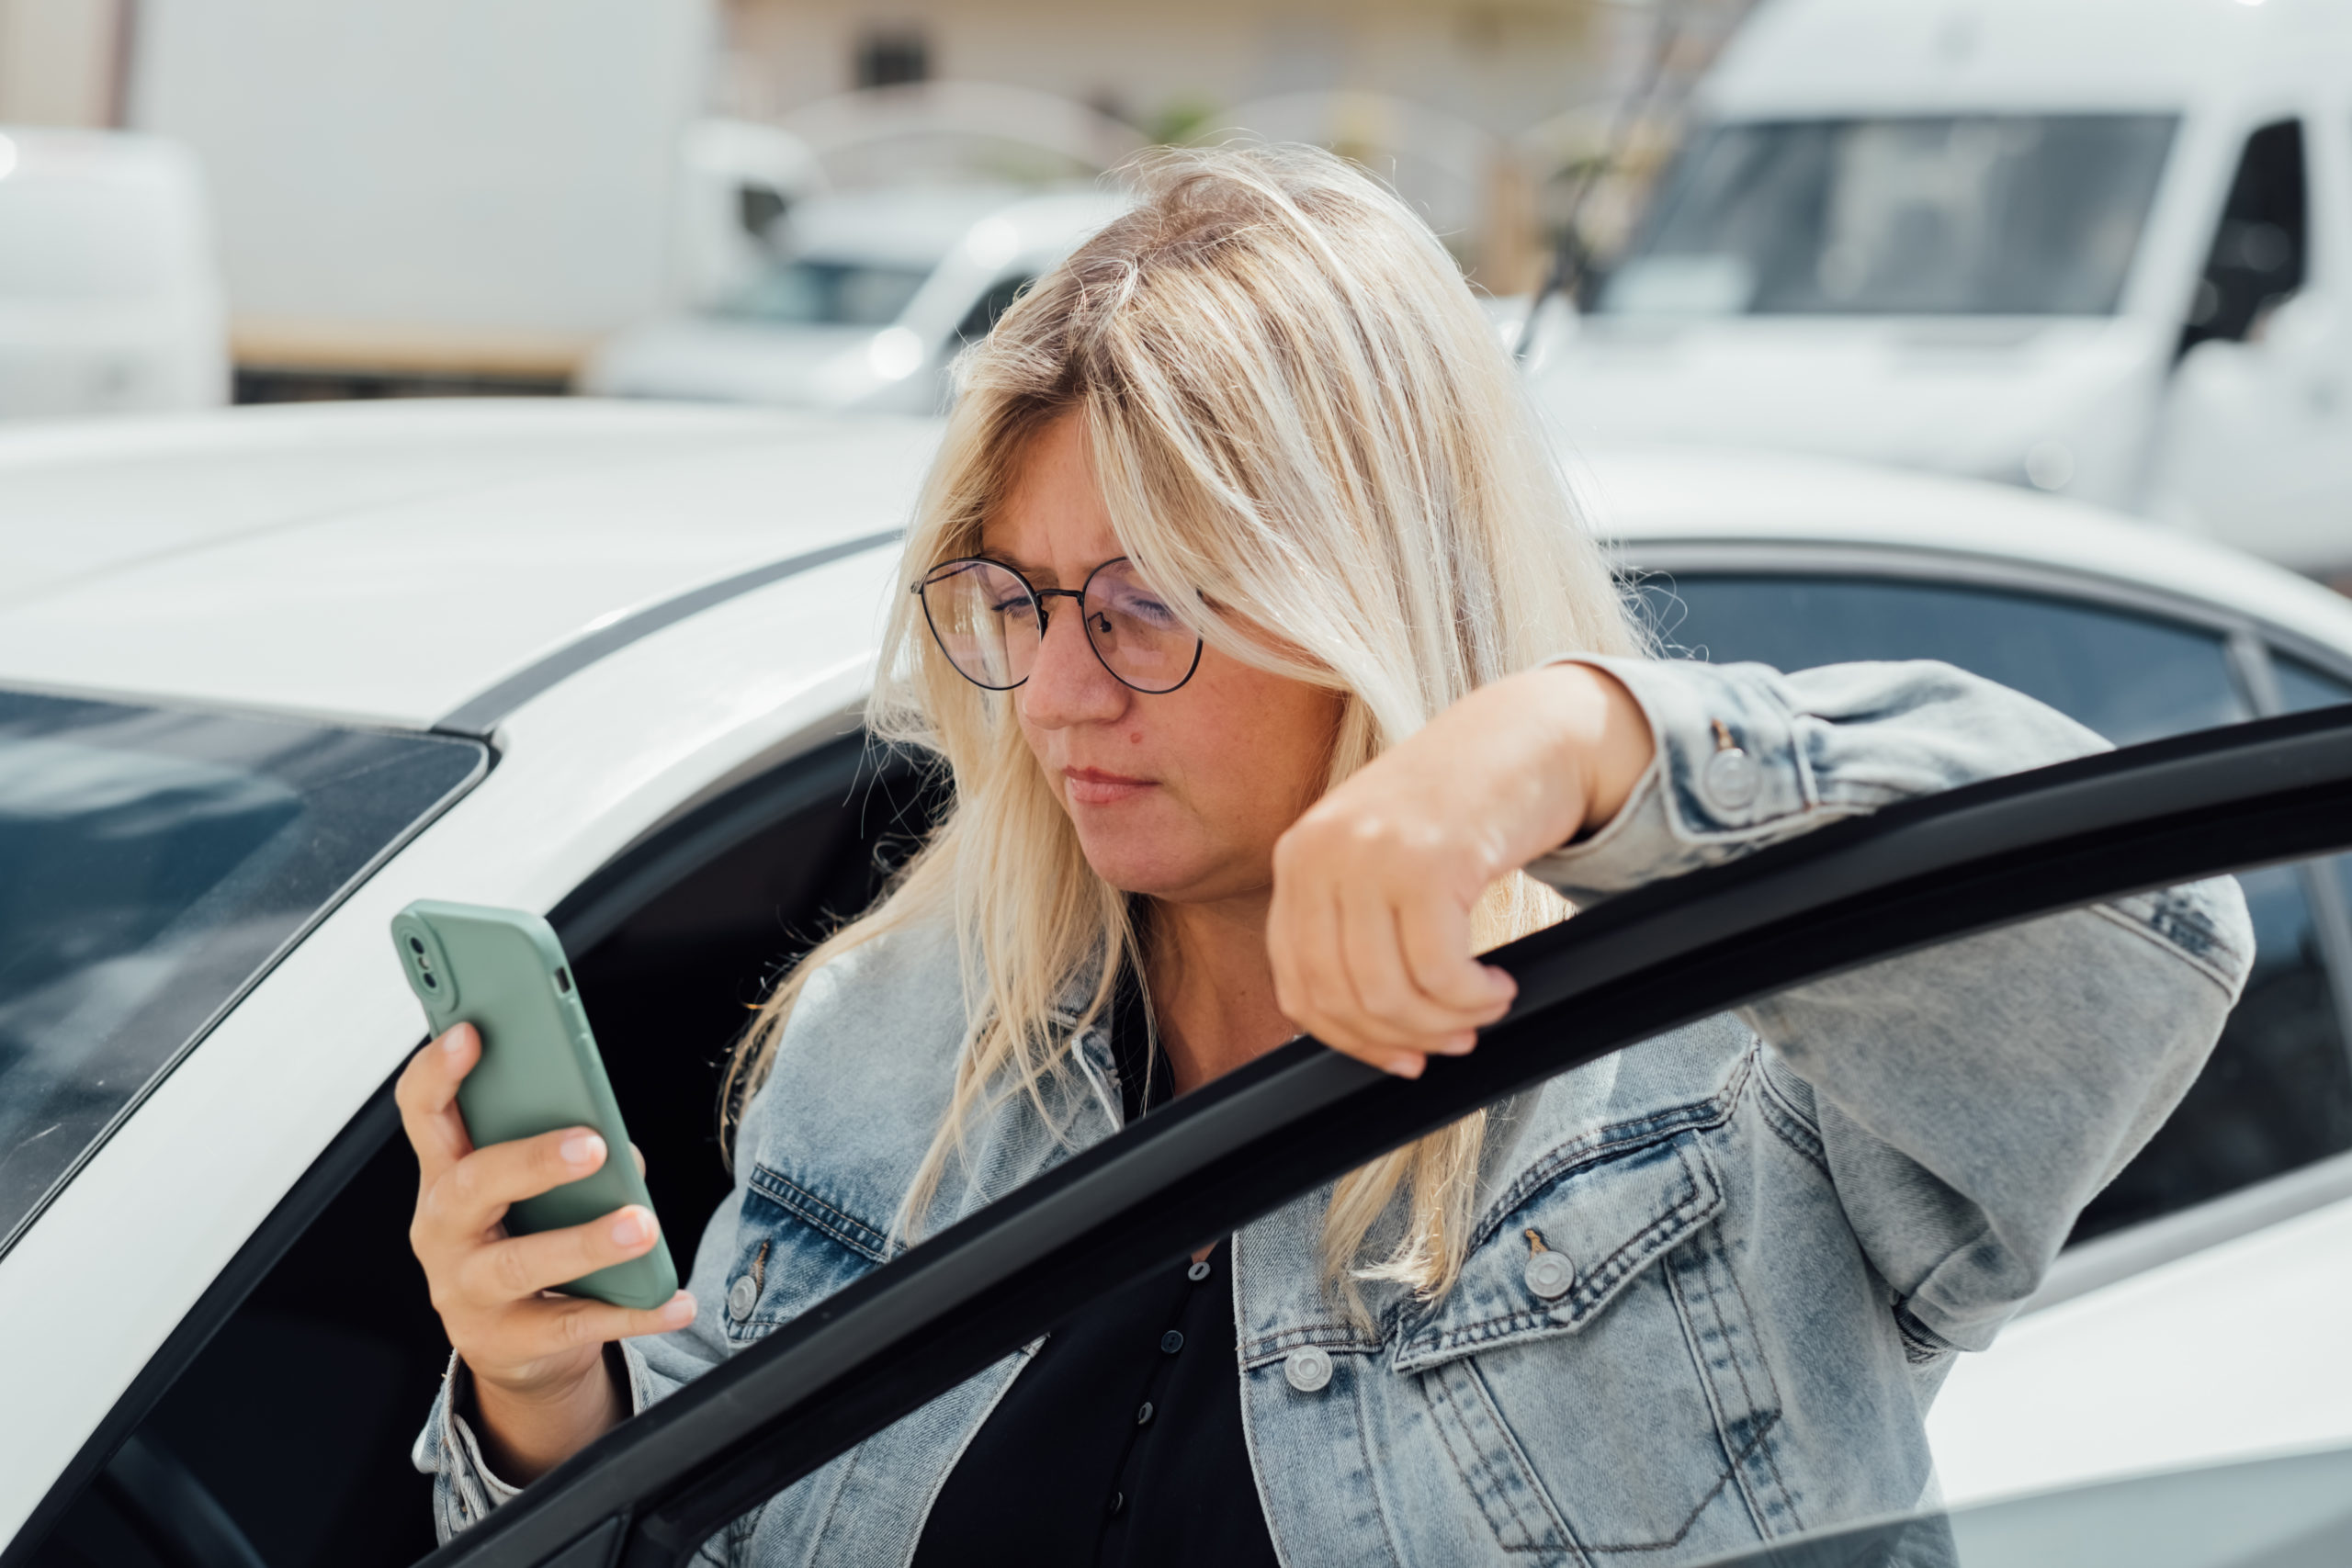 https://autolab.com.co/wp-content/uploads/woman-standing-near-car-and-looking-at-her-mobile-2023-03-31-01-59-12-utc-scaled.jpg